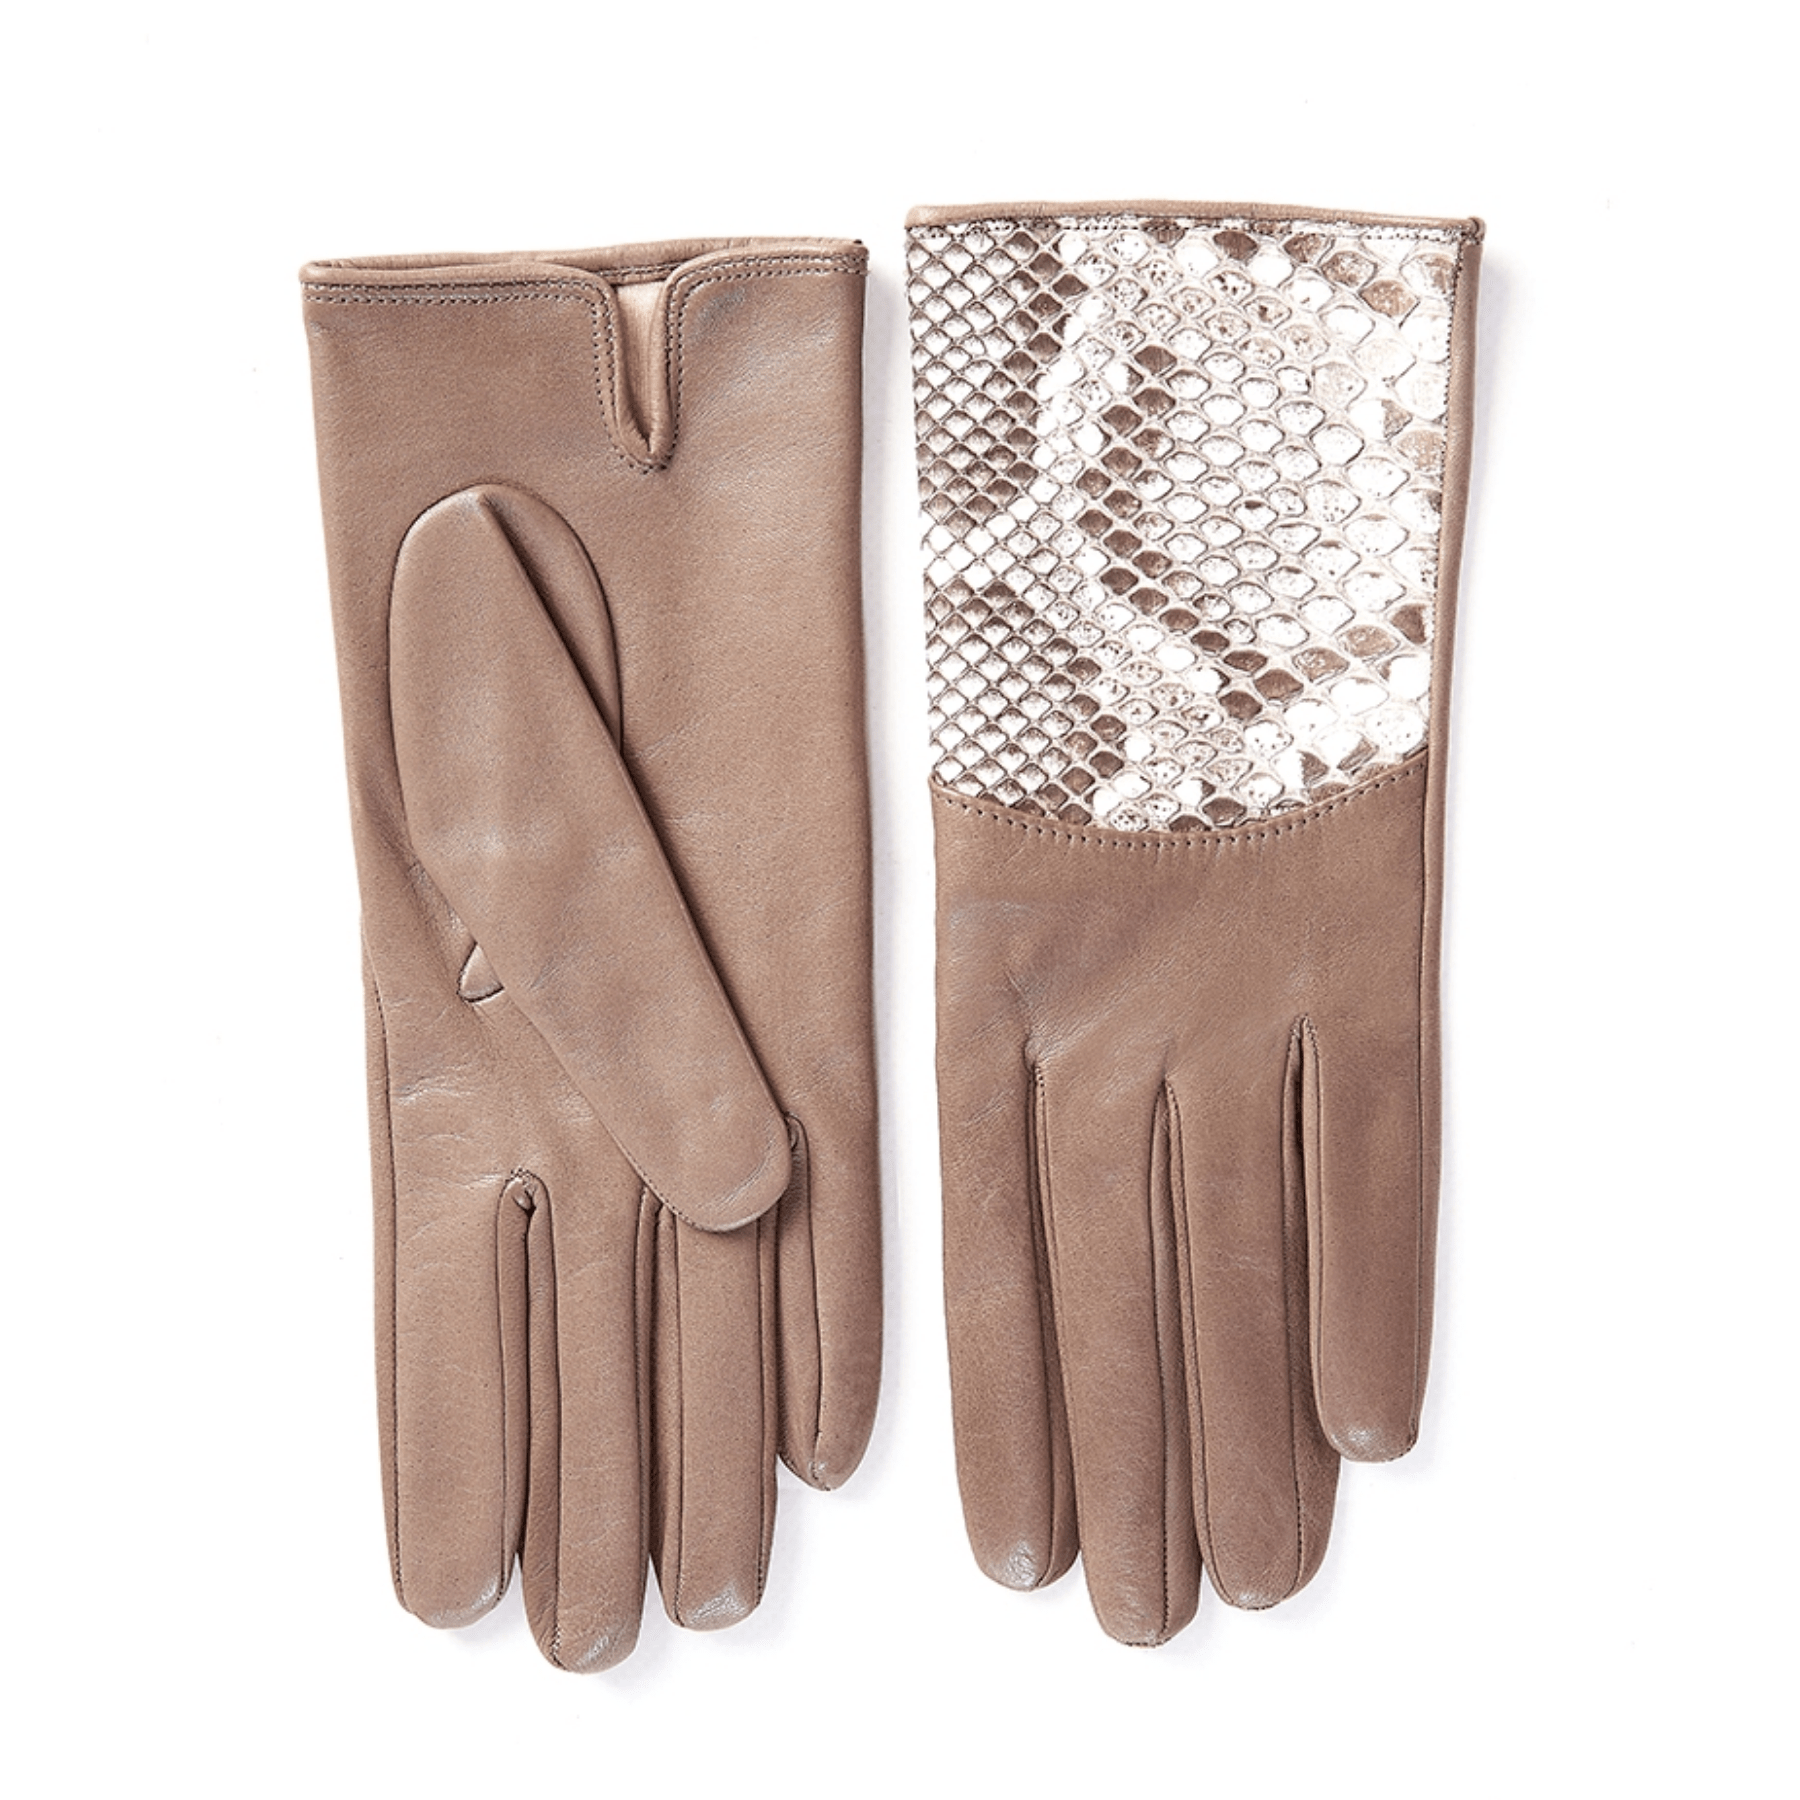 Women's silk lined sheepskin leather gloves with python top detail